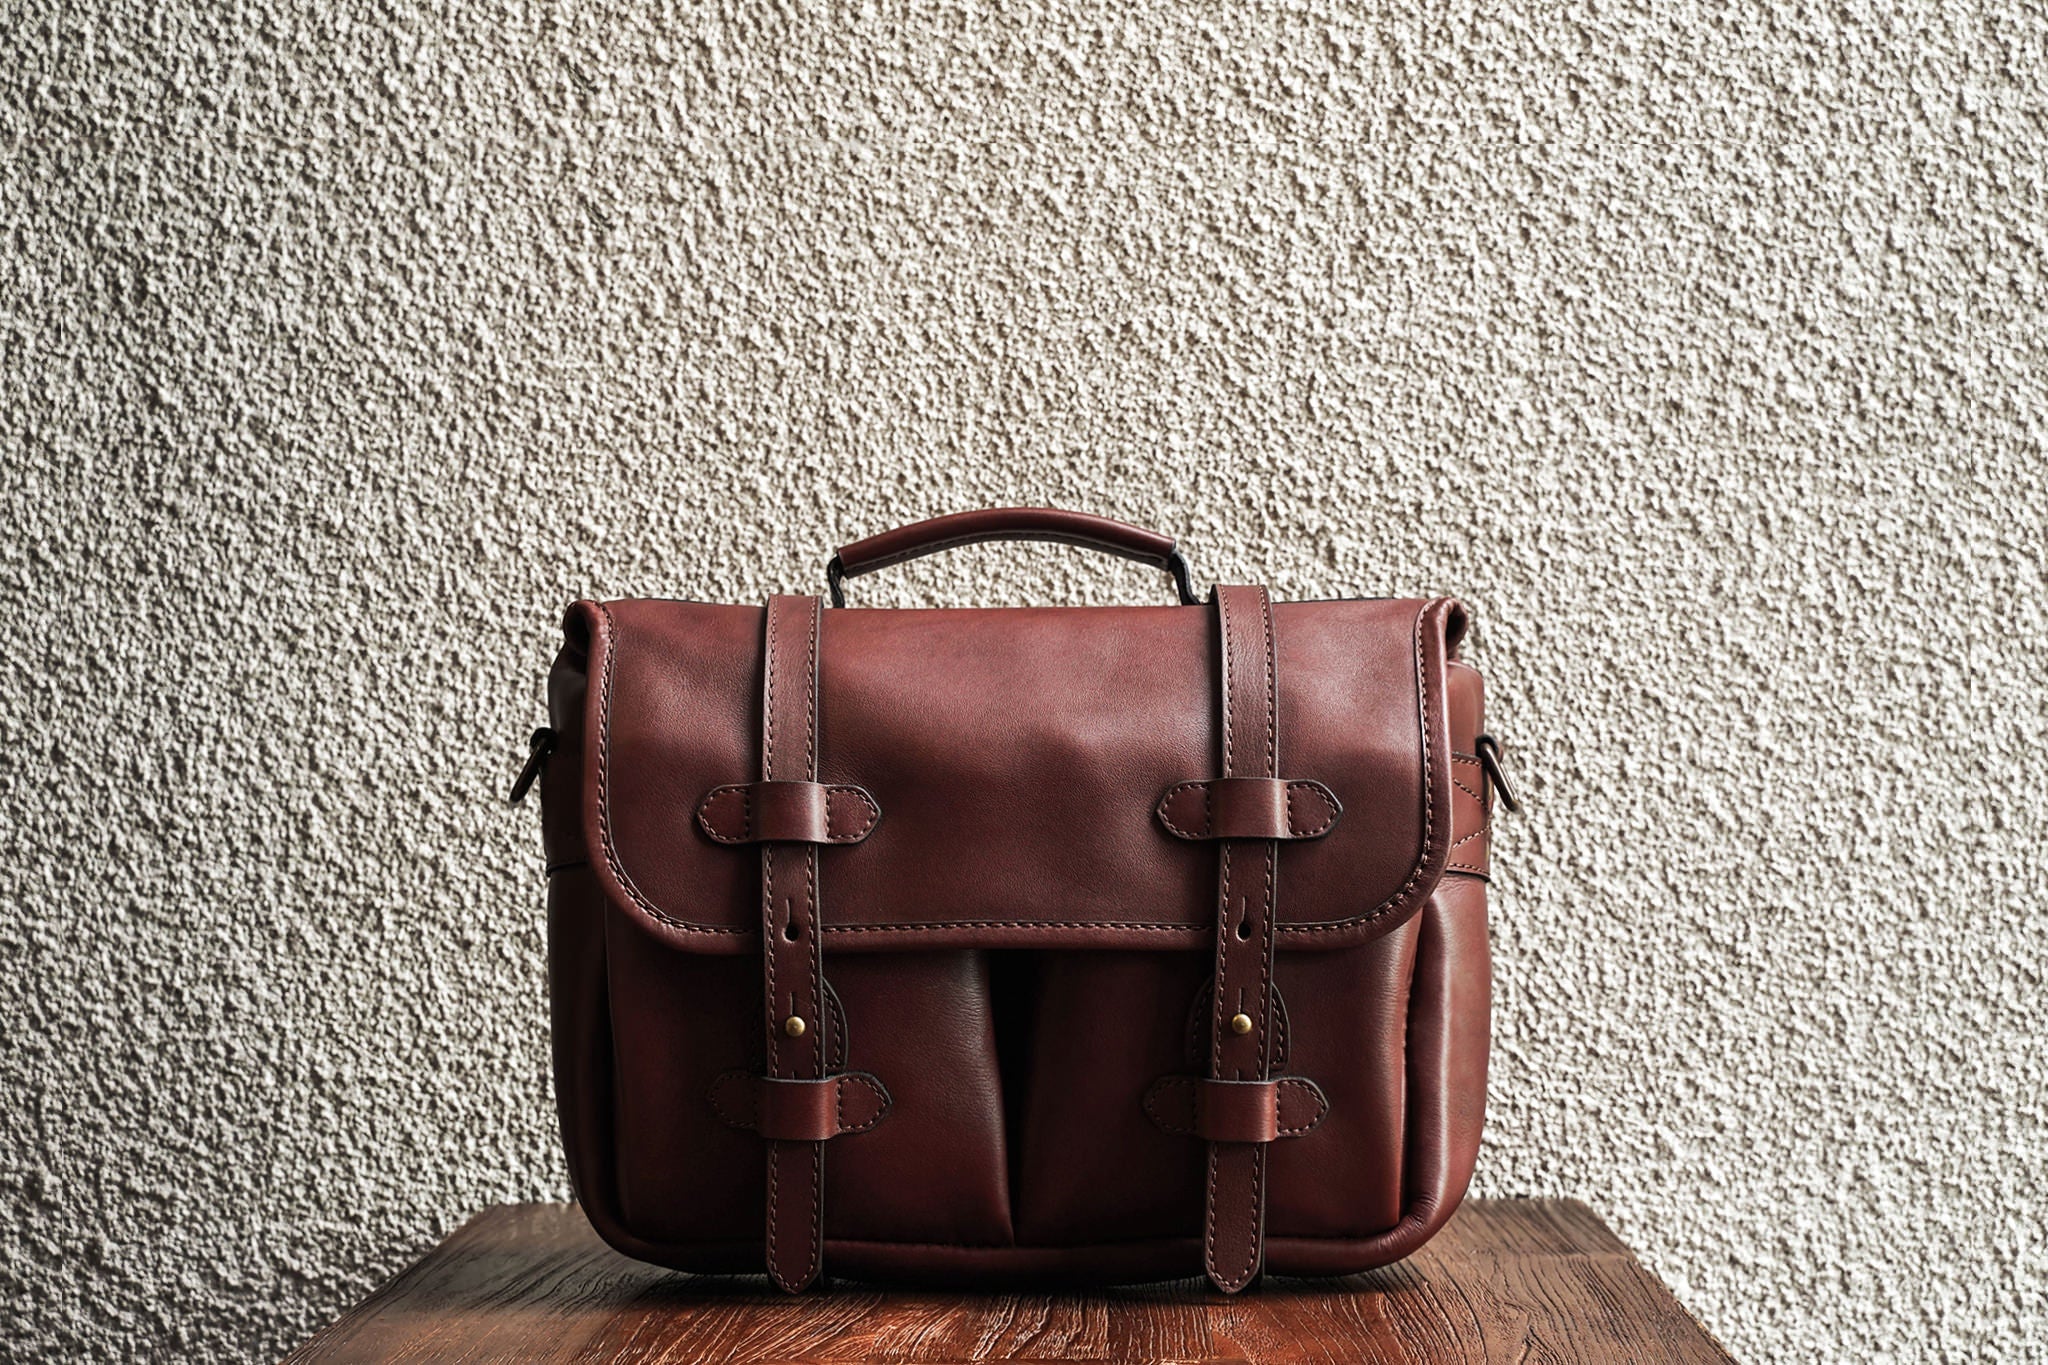 Our bags are made from as few leather pieces as possible. Fewer seams makes for a stronger bag.